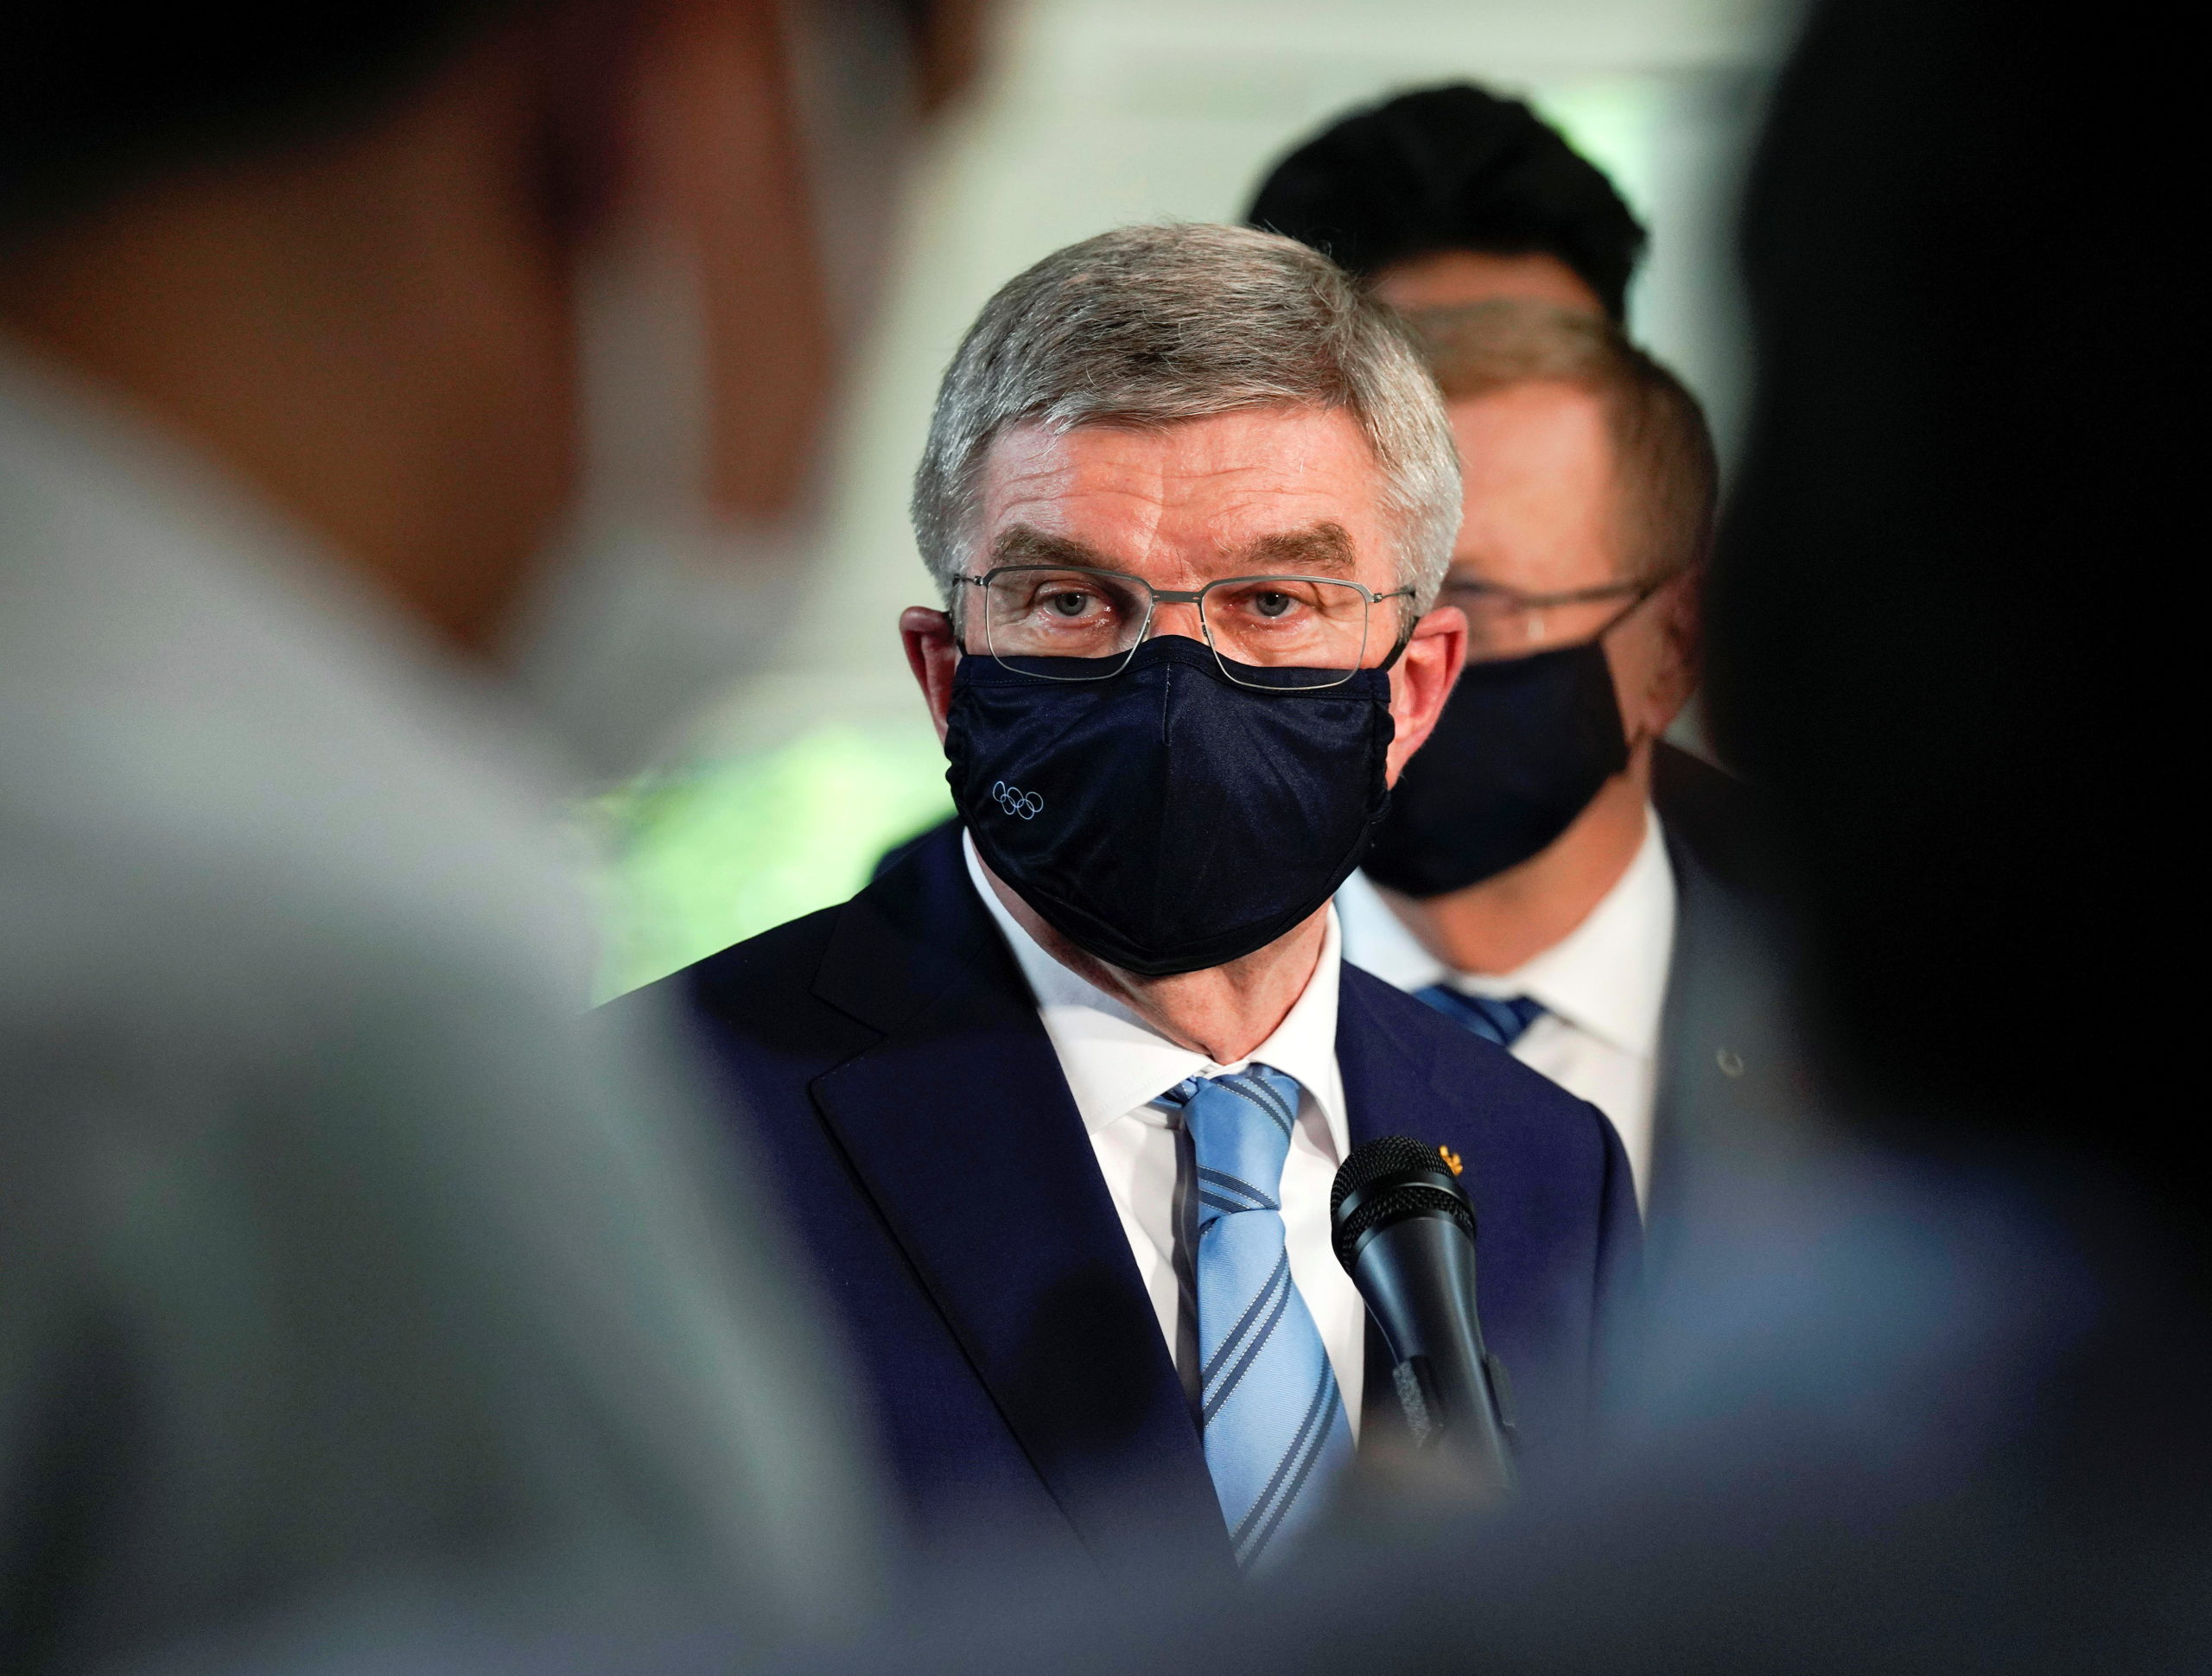 International Olympic Committee President Thomas Bach speaks to journalists after a meeting with Japanese Prime Minister Yoshihide Suga, in Tokyo, Japan, July 14, 2021. Kimimasa Mayama/Pool via REUTERS